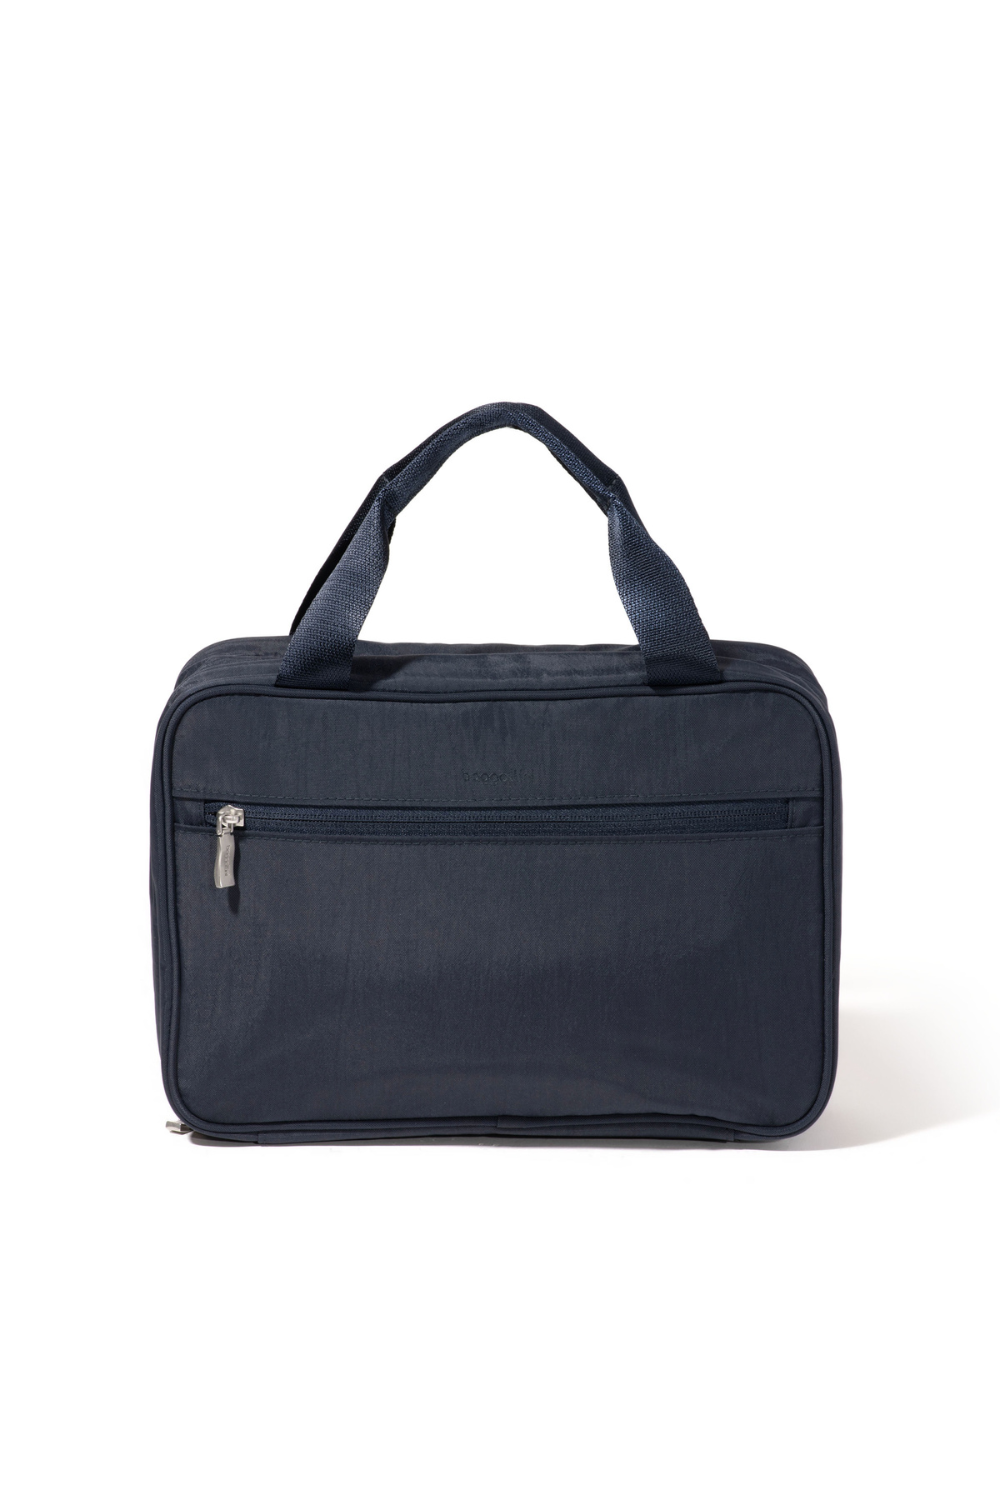 Baggallini Large Hanging Travel Toiletry | Navy